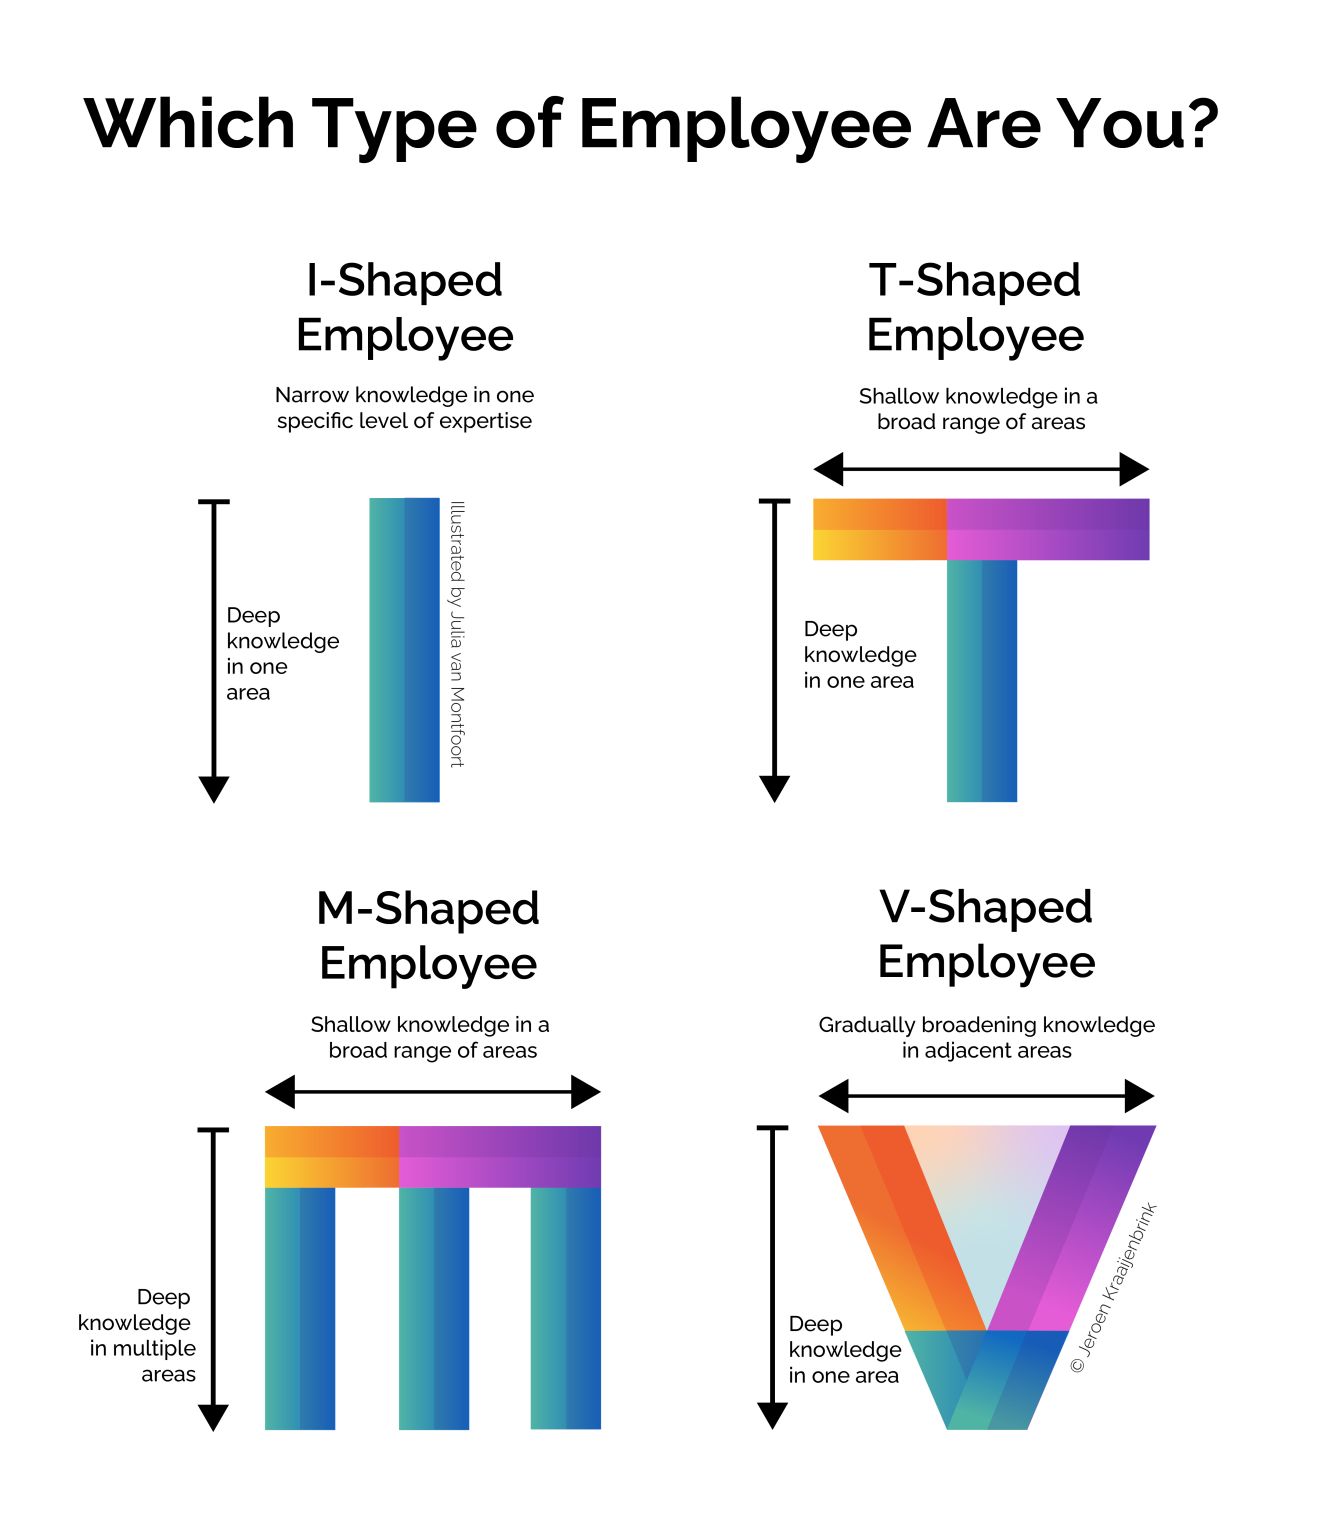 [05-Apr-24] Which type of employee are you?